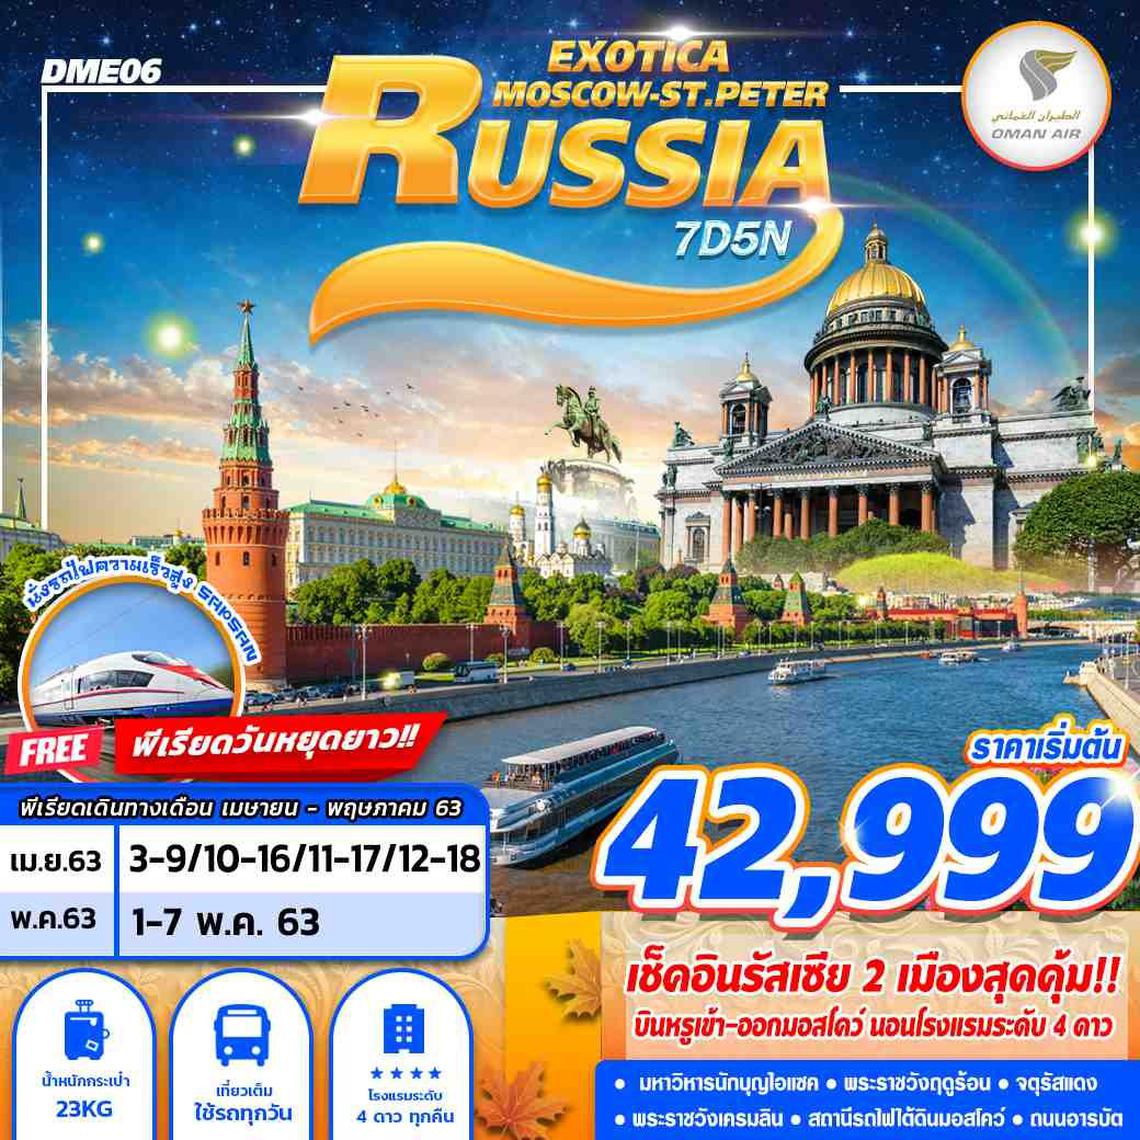 DME06 WY RUSSIA EXOTICA MOSCOW ST.PETER 7D5N